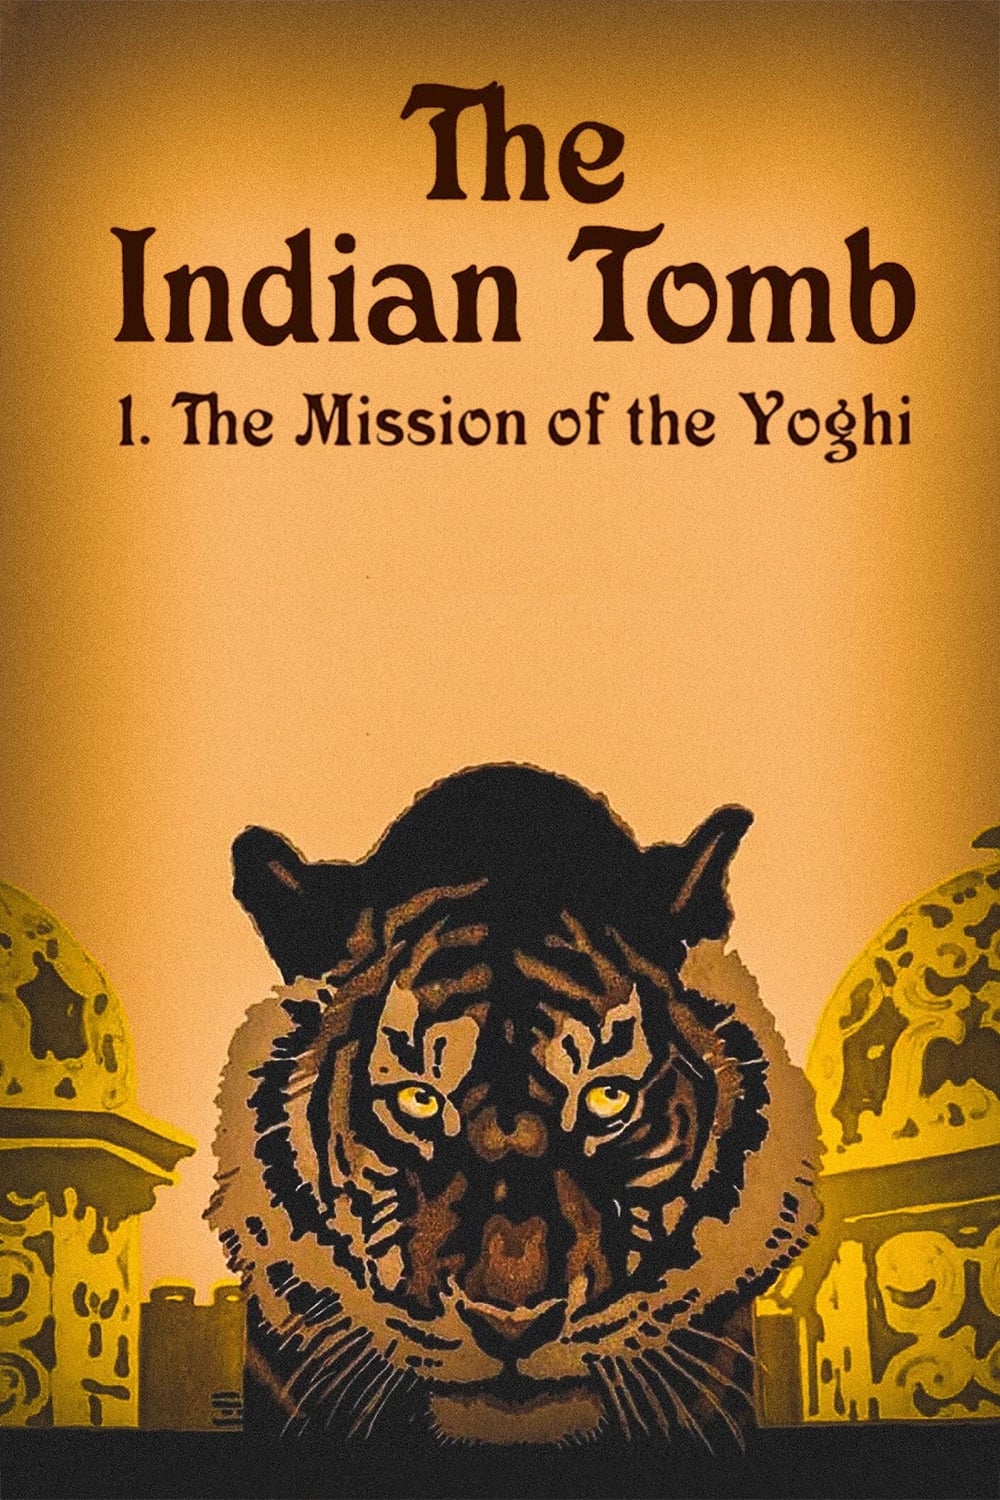 The Indian Tomb, Part I: The Mission of the Yogi (1921)